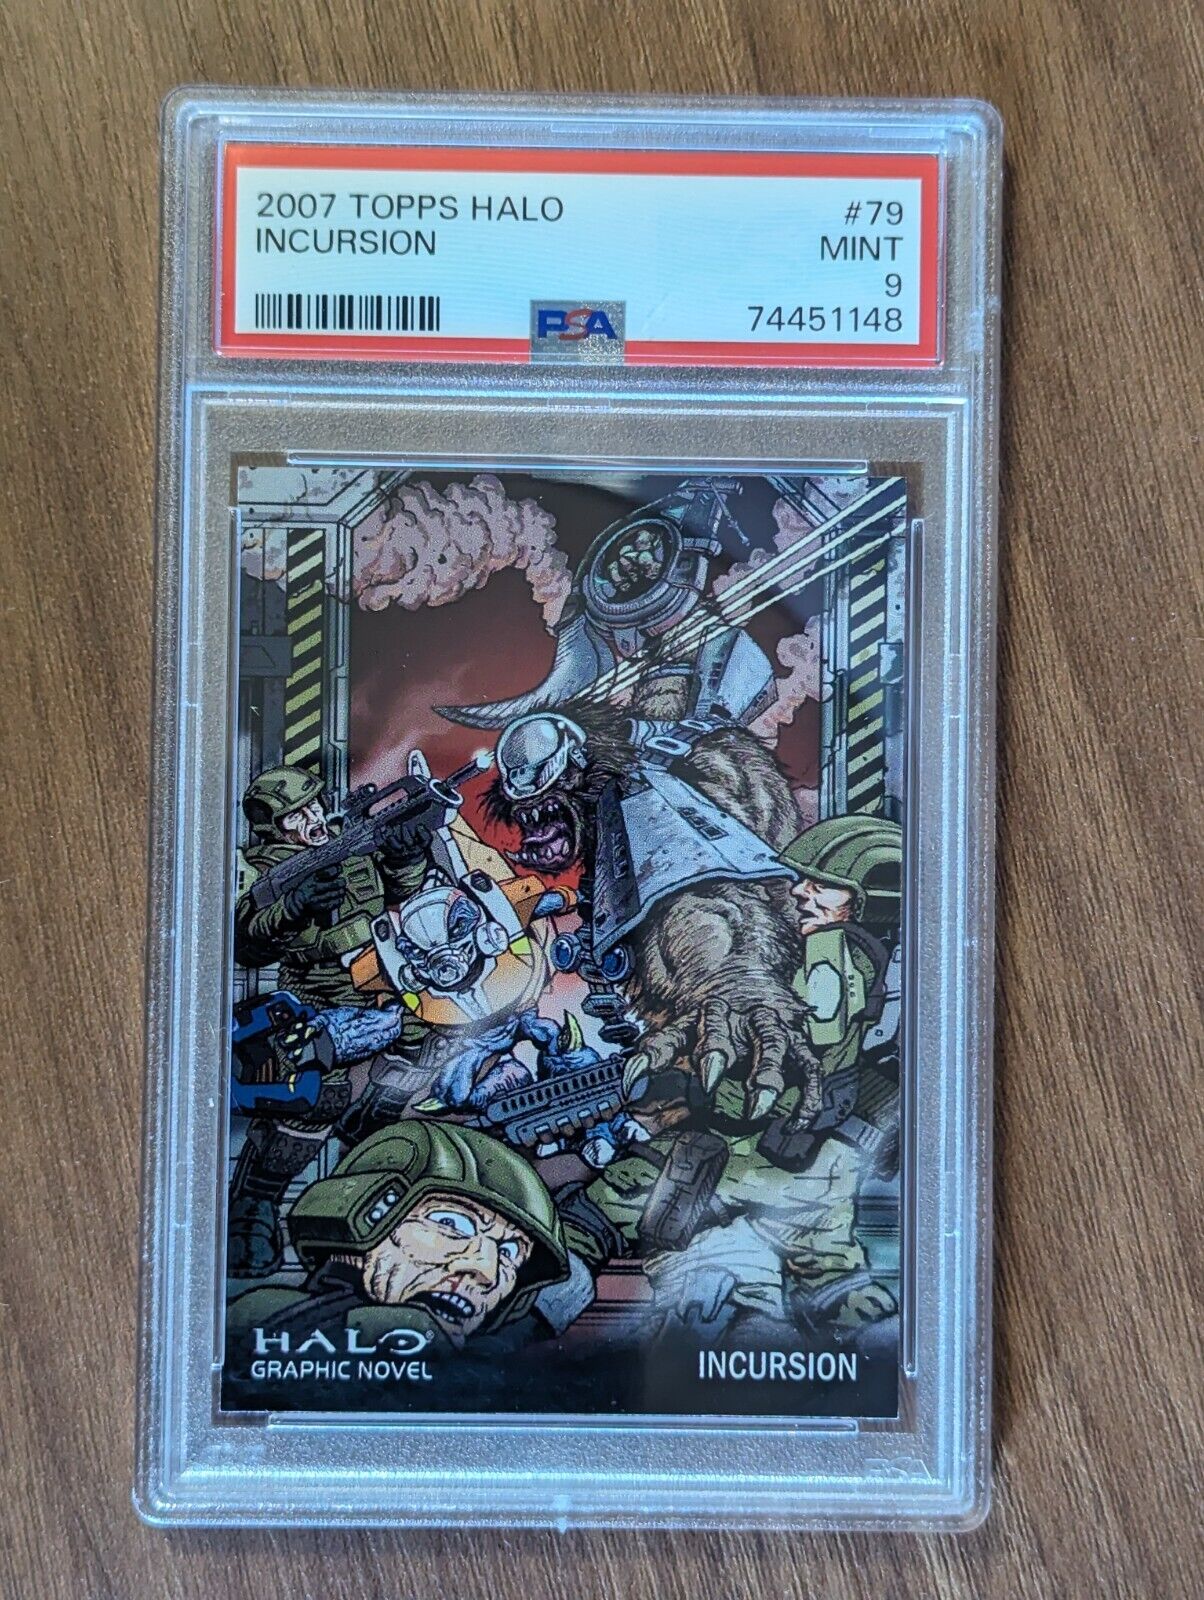 Incursion - Graded PSA Mint 9 - #79 - 2007 Topps Halo - 2007 Halo Card